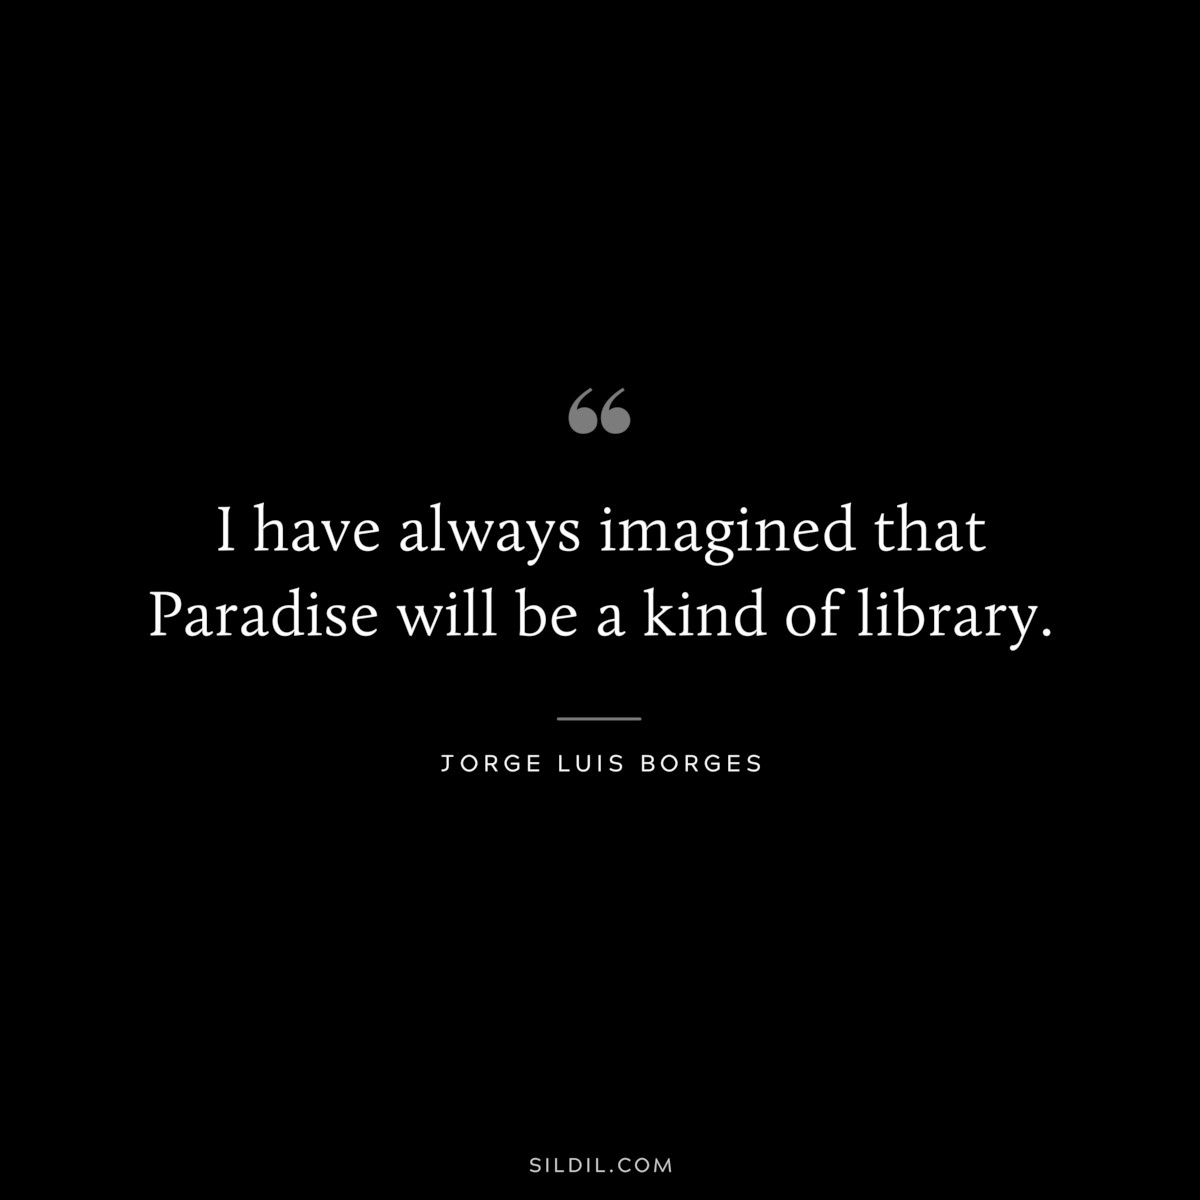 I have always imagined that Paradise will be a kind of library. ― Jorge Luis Borges